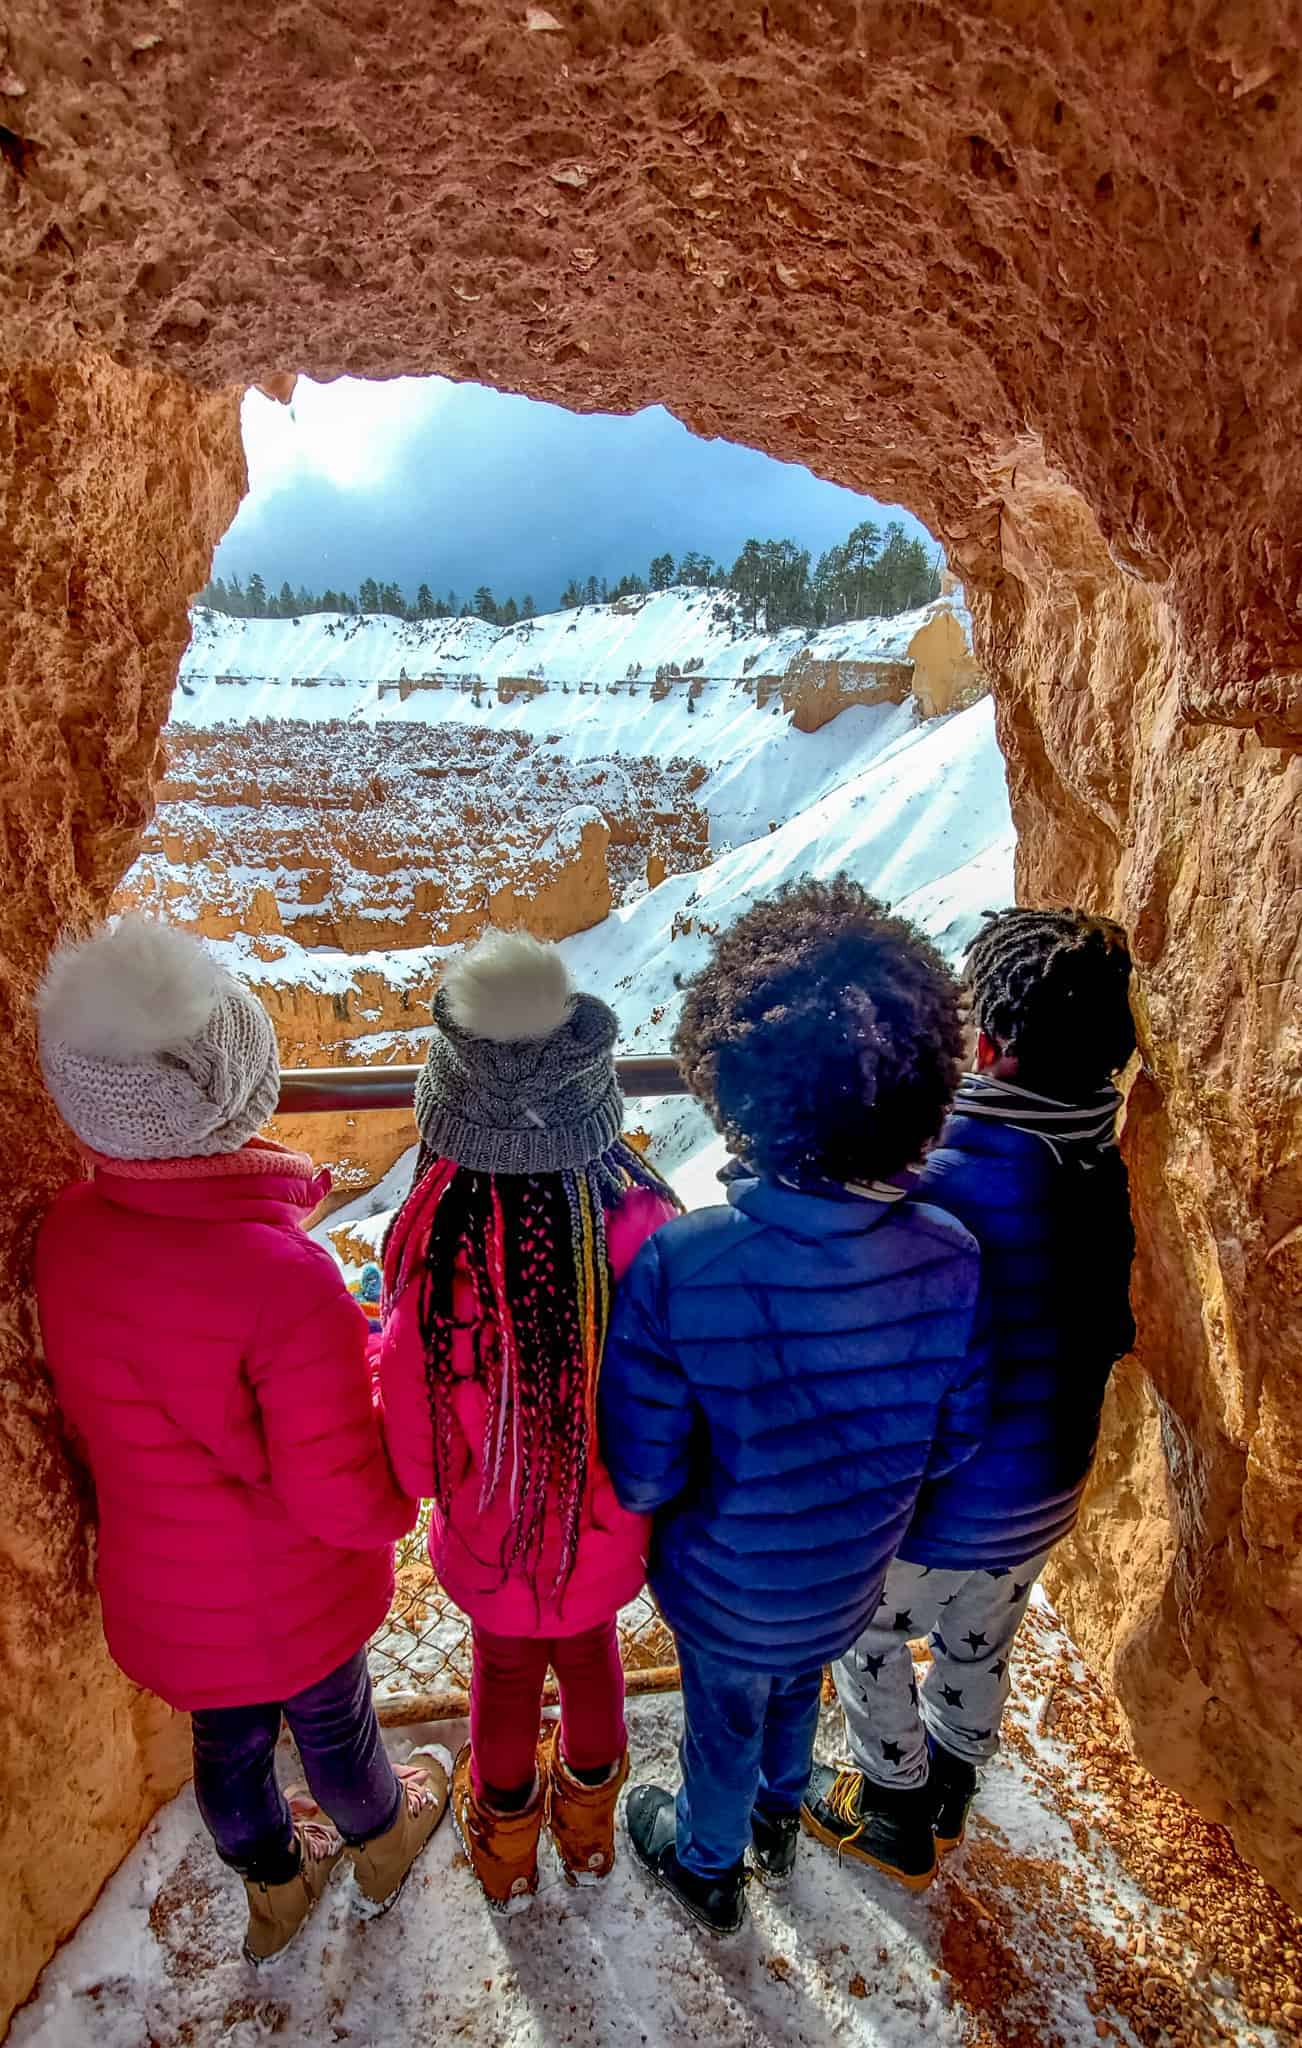 Children looking out towards the view at Bryce Canyon National Park.